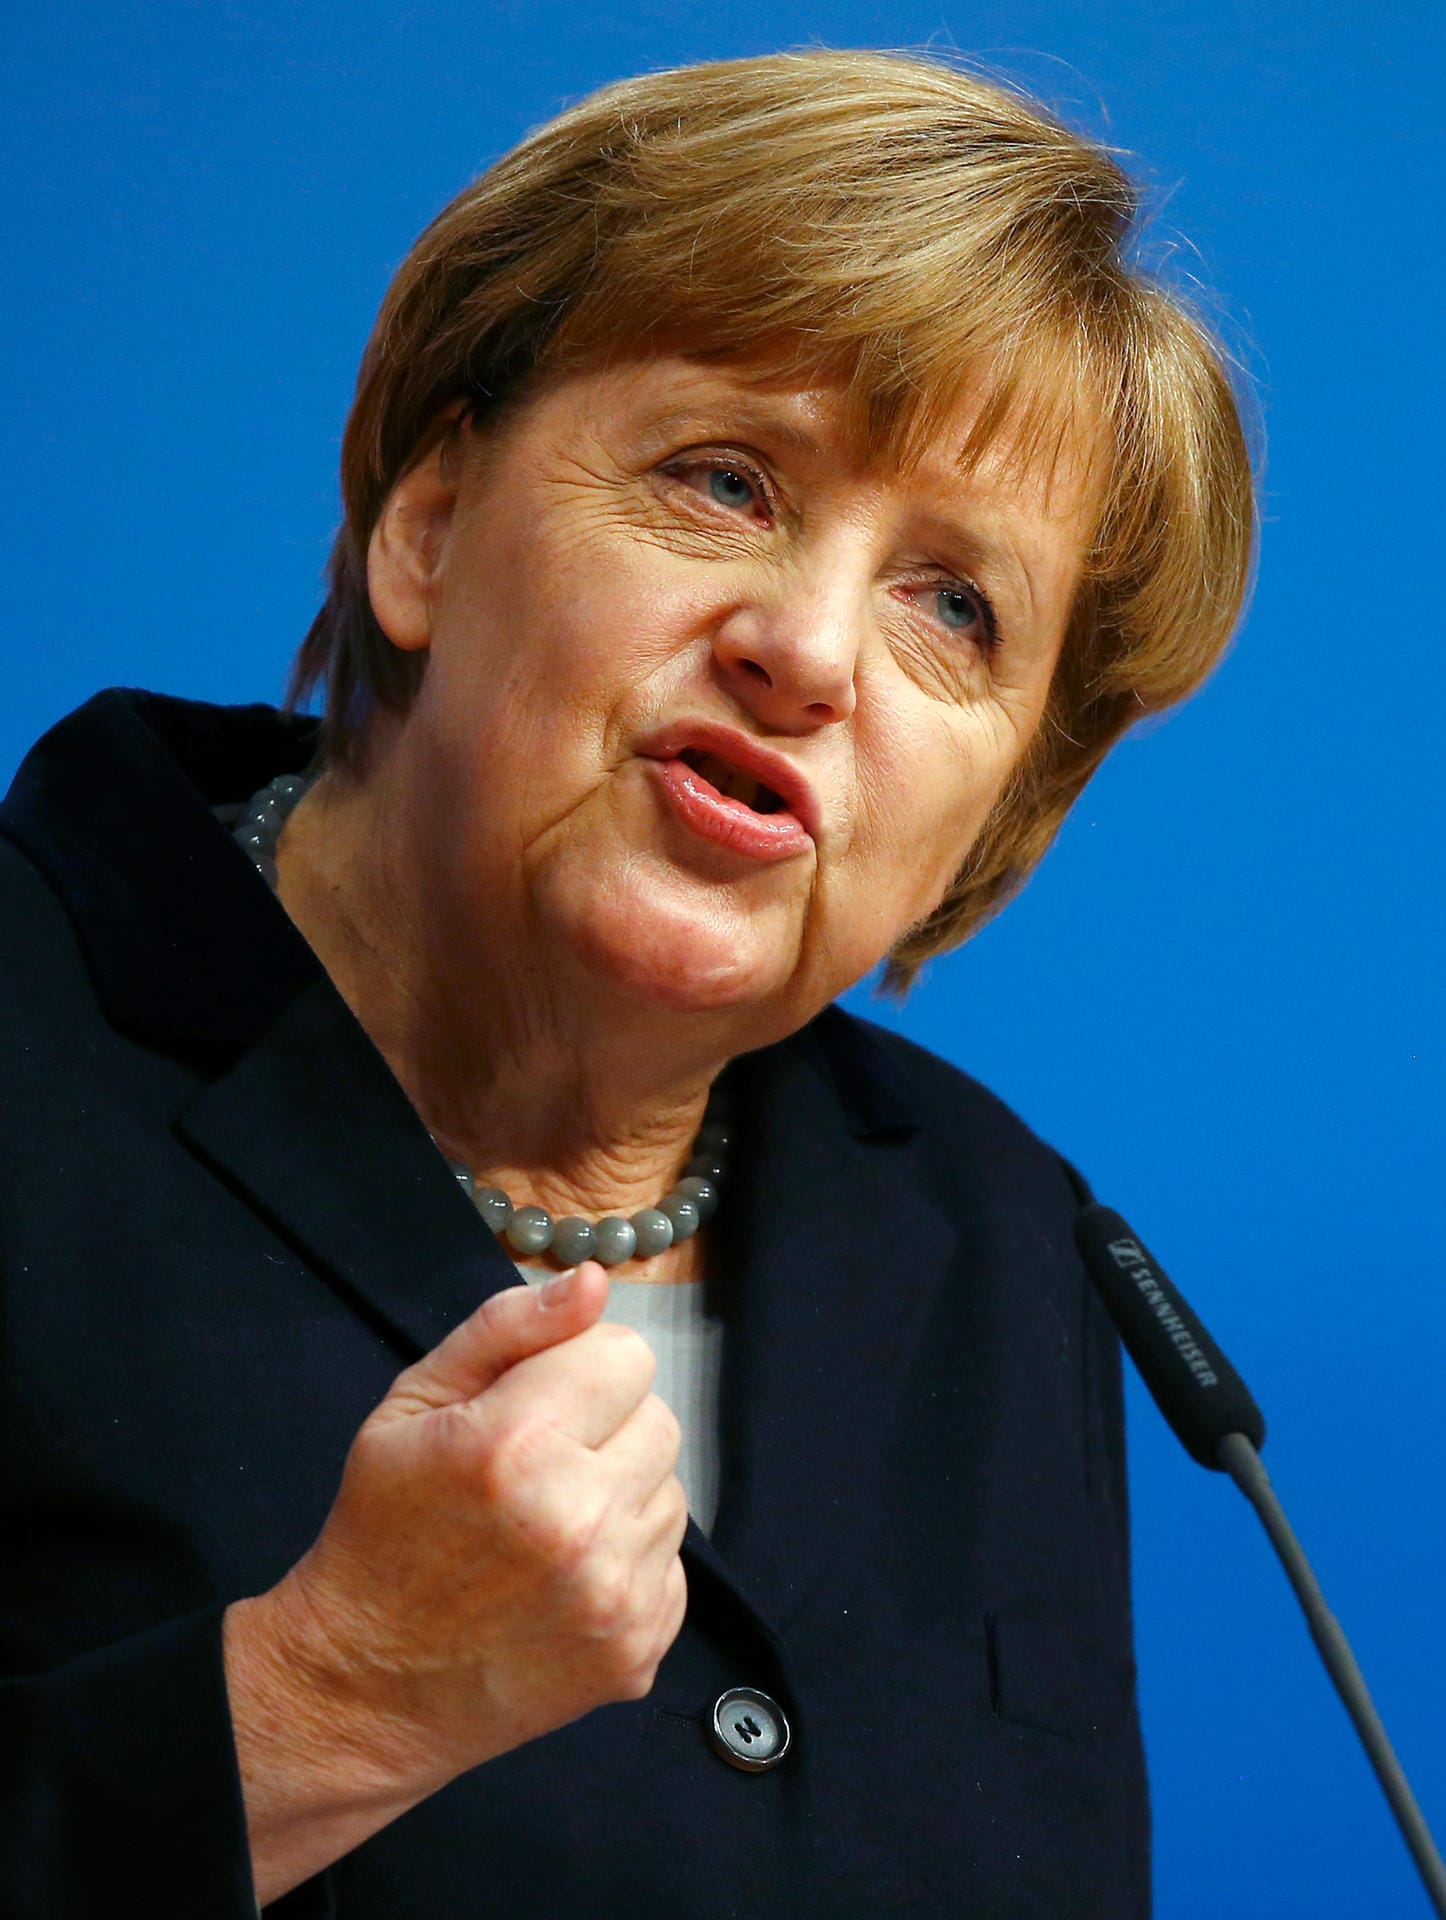 Angela Merkel: "Time" Person of the Year 2015